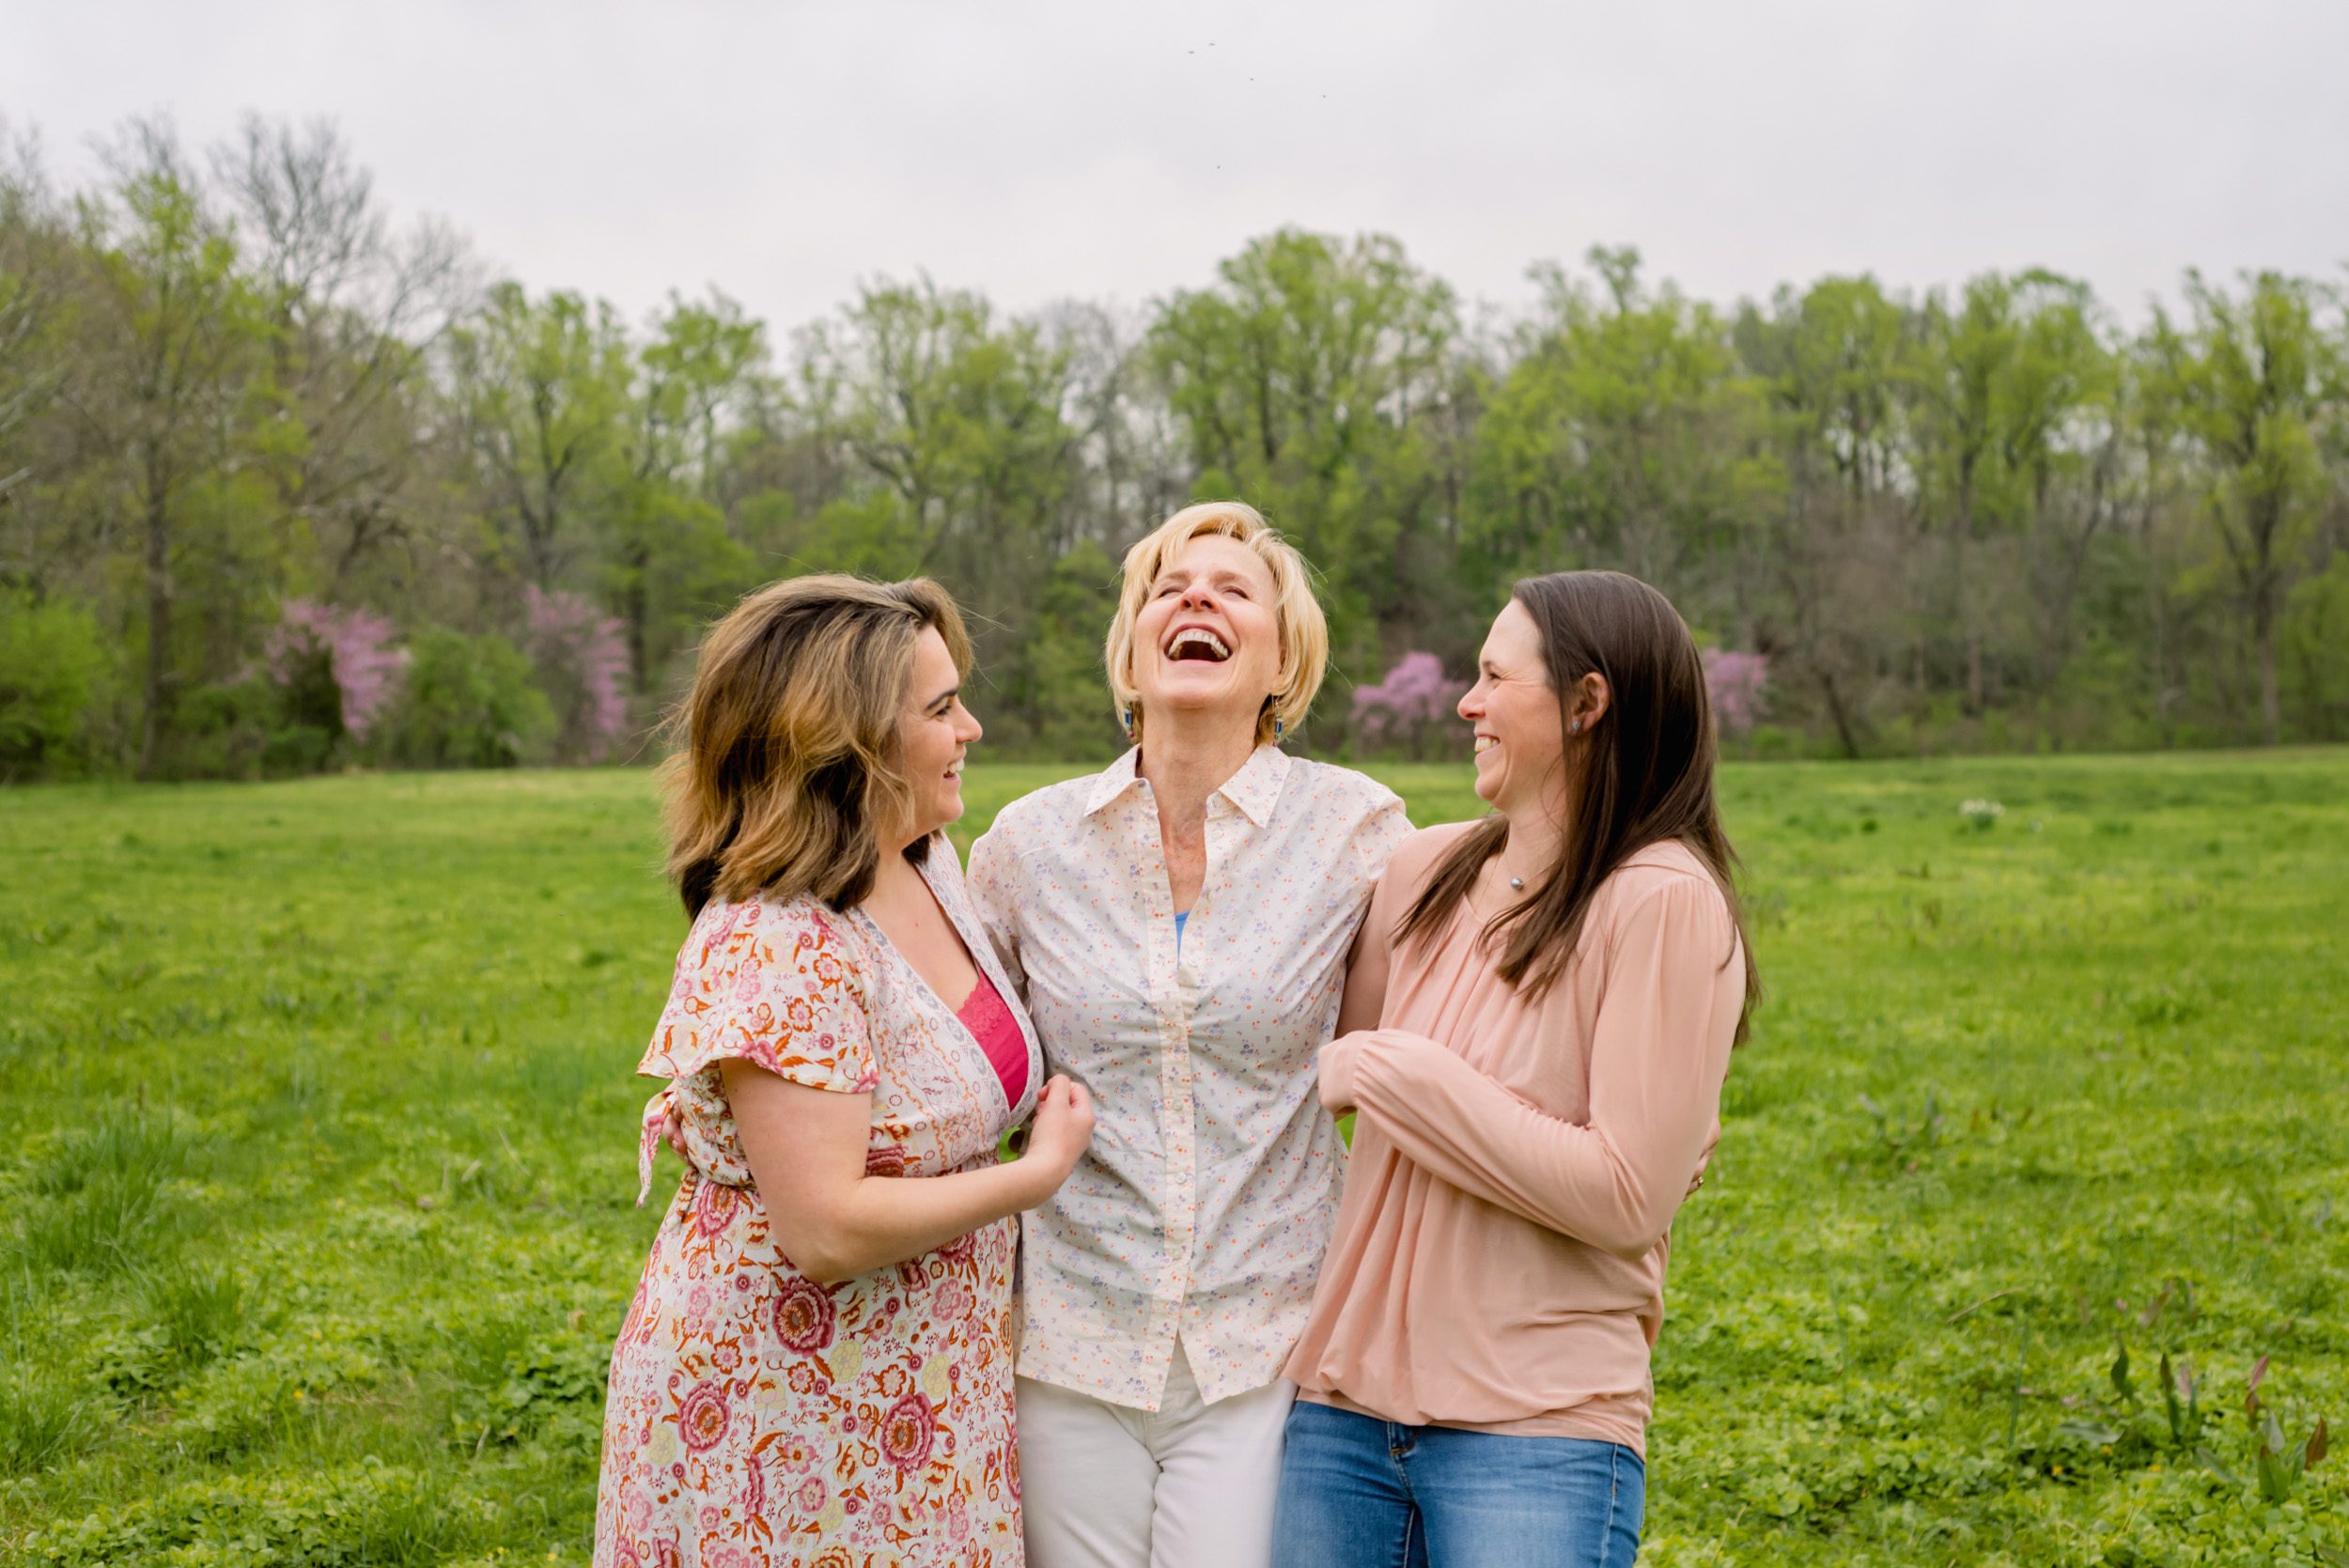 A mom and her two adult daughters laughing in a grassy field with redbud trees blooming in the background during an extended family photoshoot